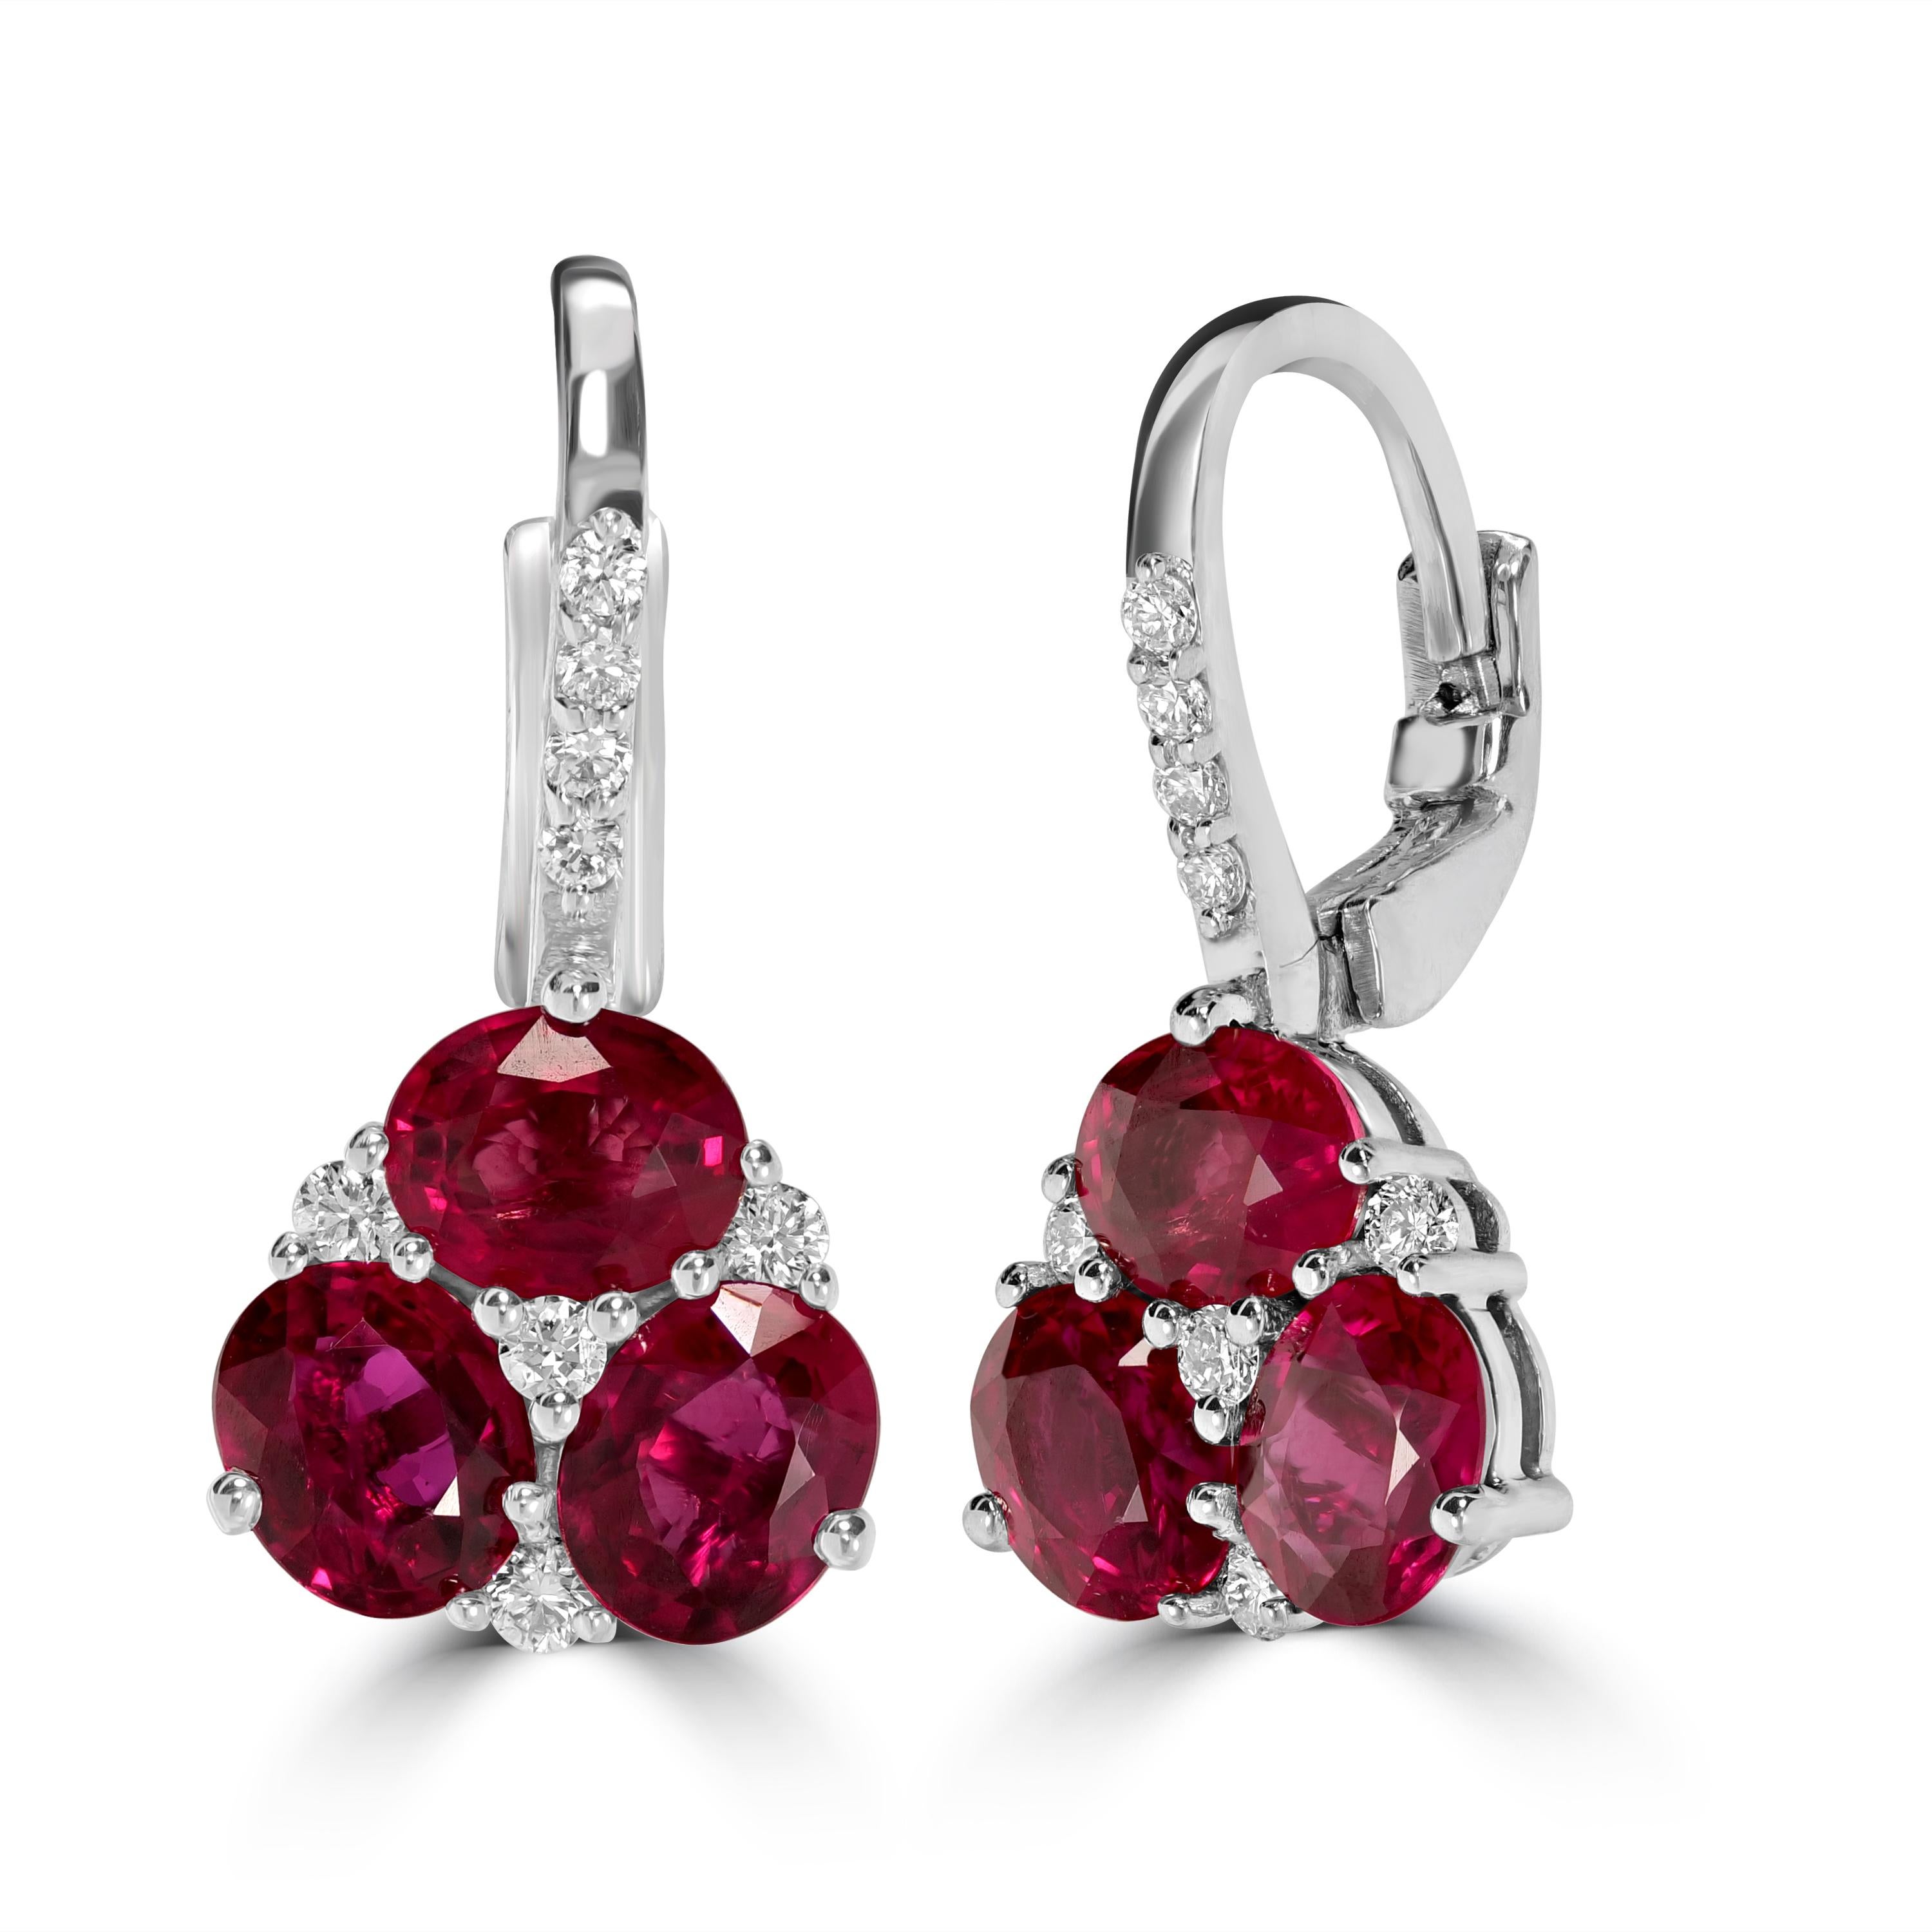 This drop dangle earring is a cute statement earrings which can be worn everyday or even on special occasions. The earrings consist of total 3.22 carats of rubies and diamonds. The main attraction to this earrings are the rubies which are sourced